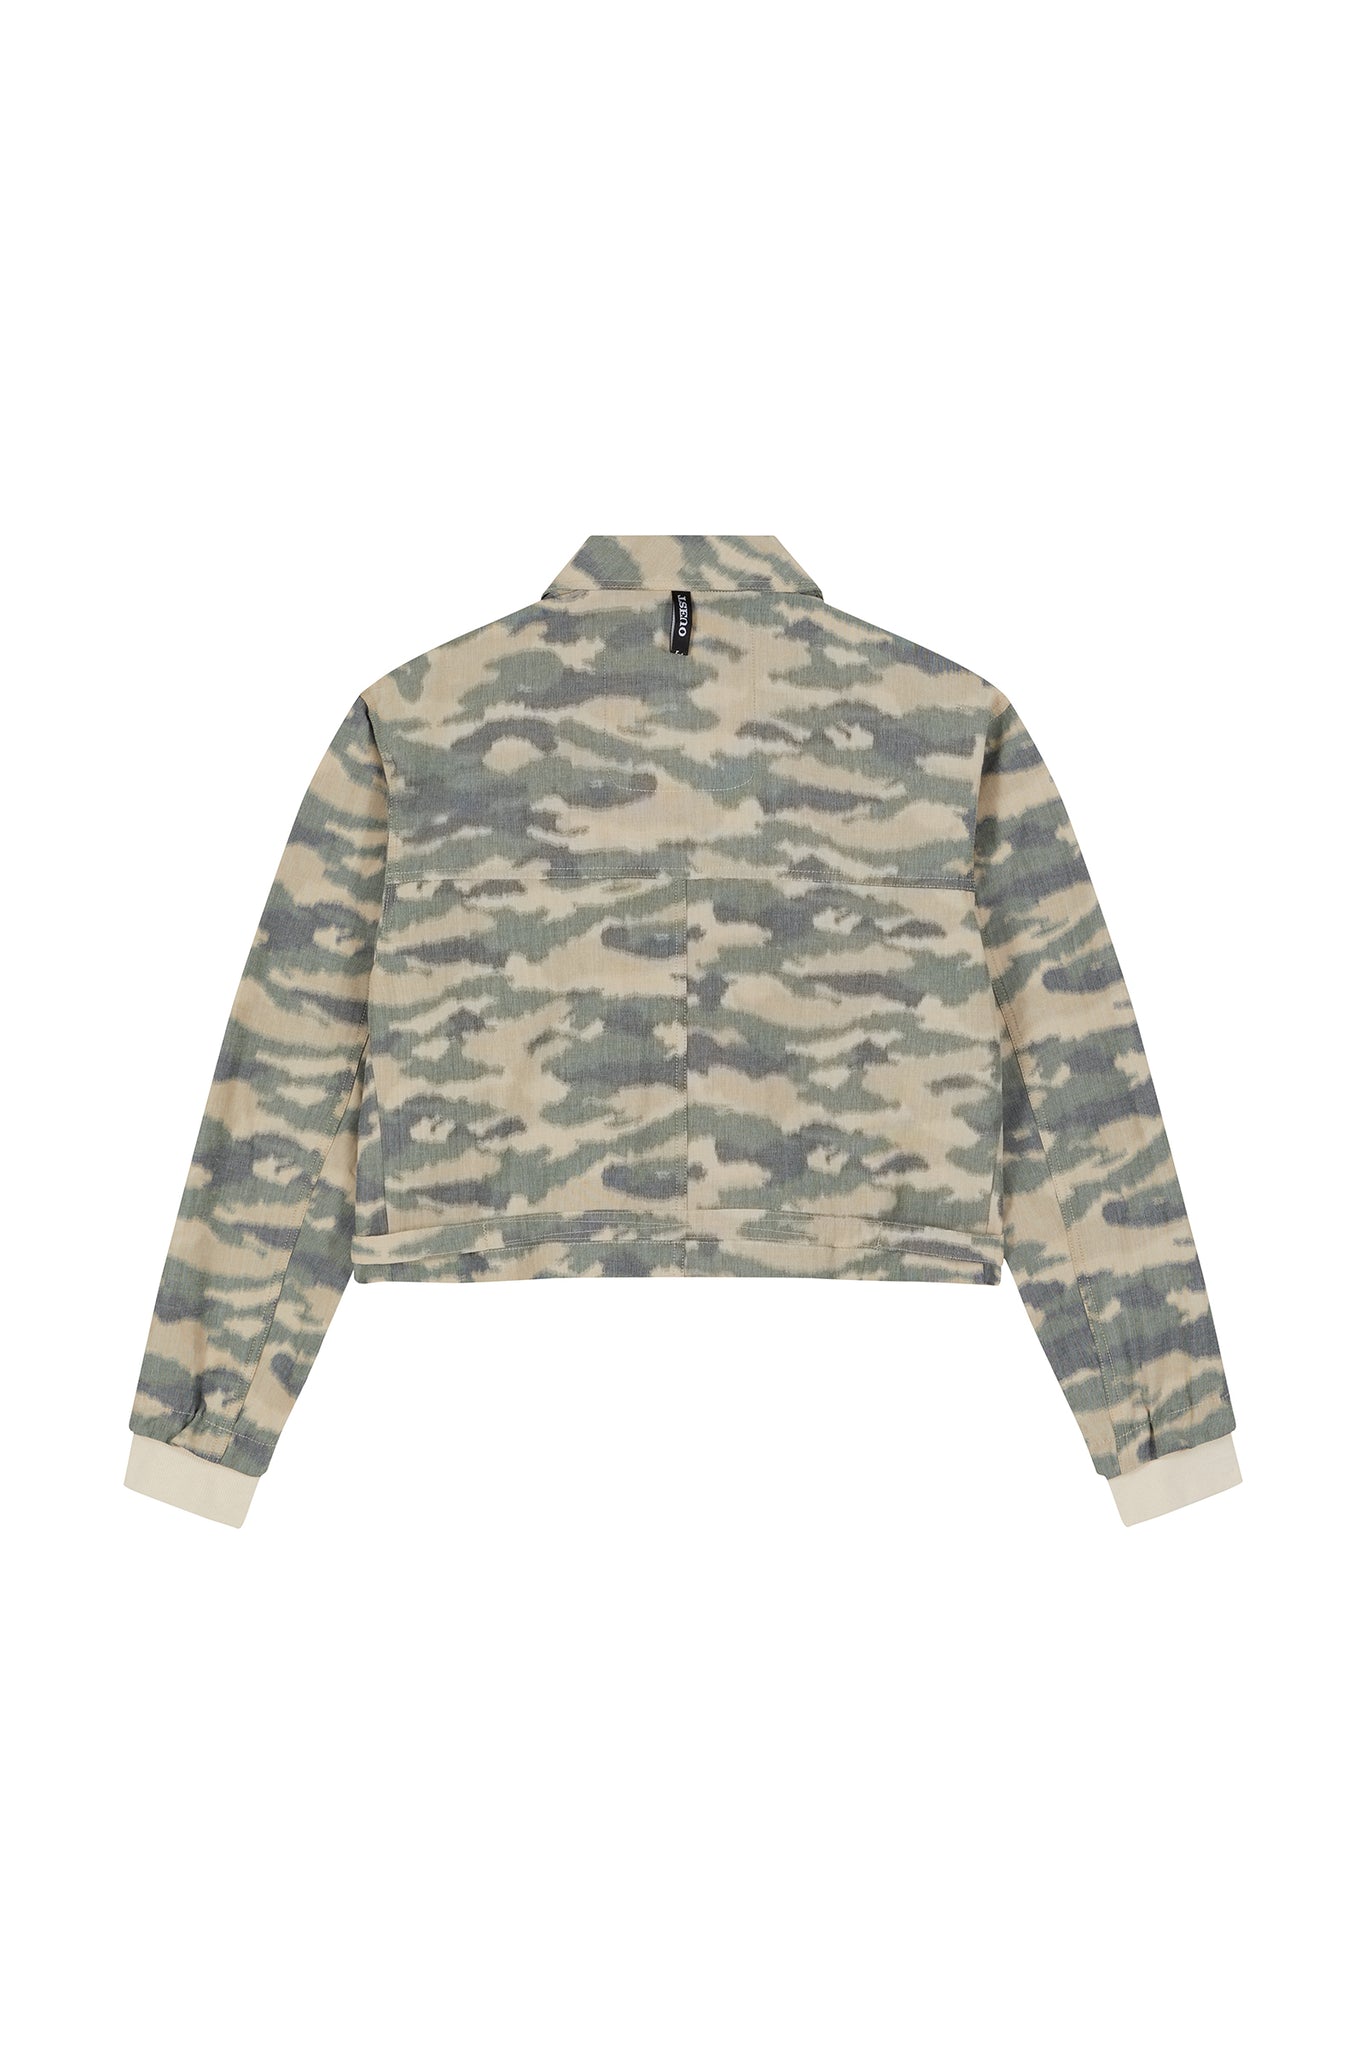 THE ASTRO JACKET IN CAMOUFLAGE COTTON